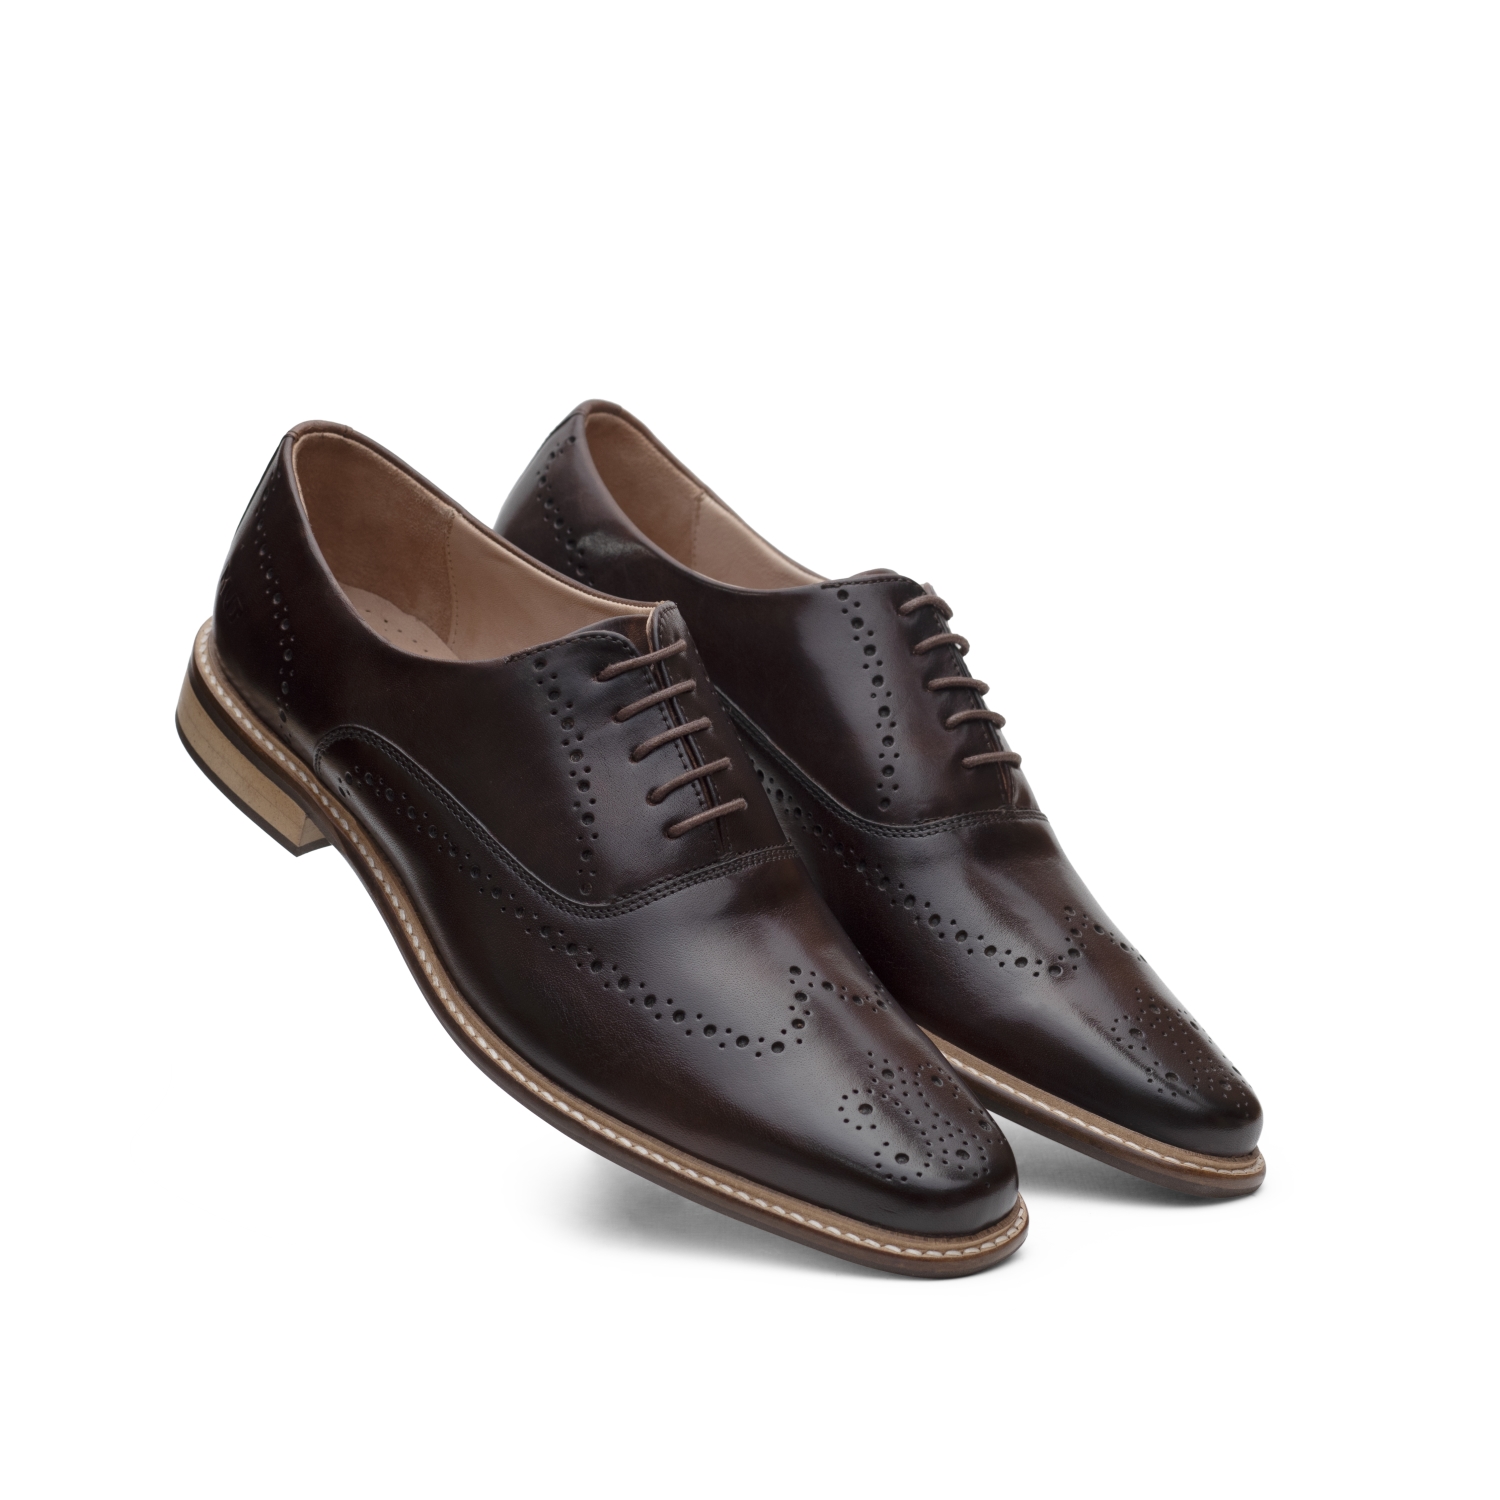 Oxford Formal Coffee Brown Shoes - MNJ Shoes - Brand New Shoes and Bags  Online Store